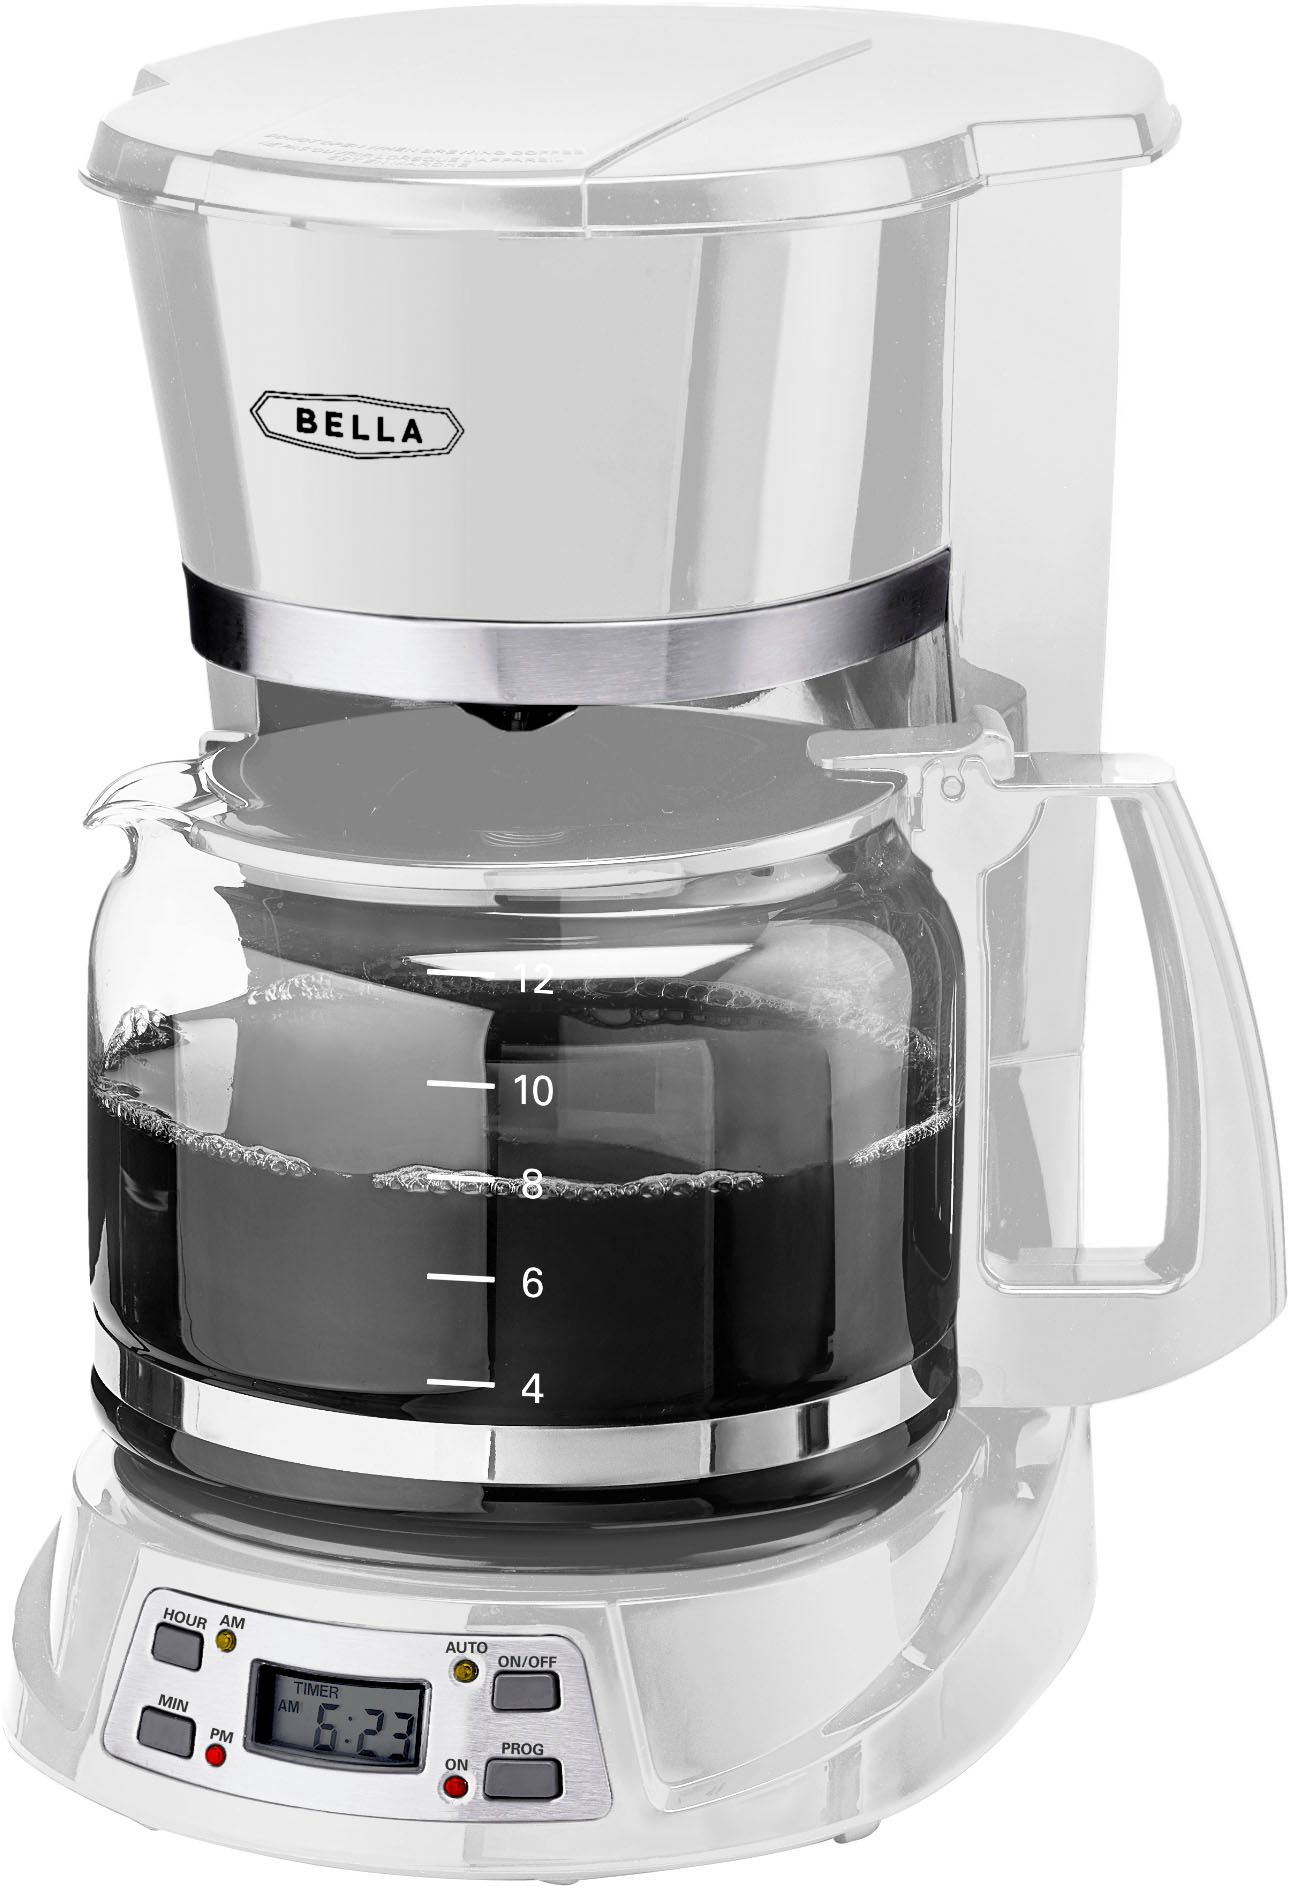 Bella Single Serve Coffeemaker in black/silver drops to just $30 for today  only